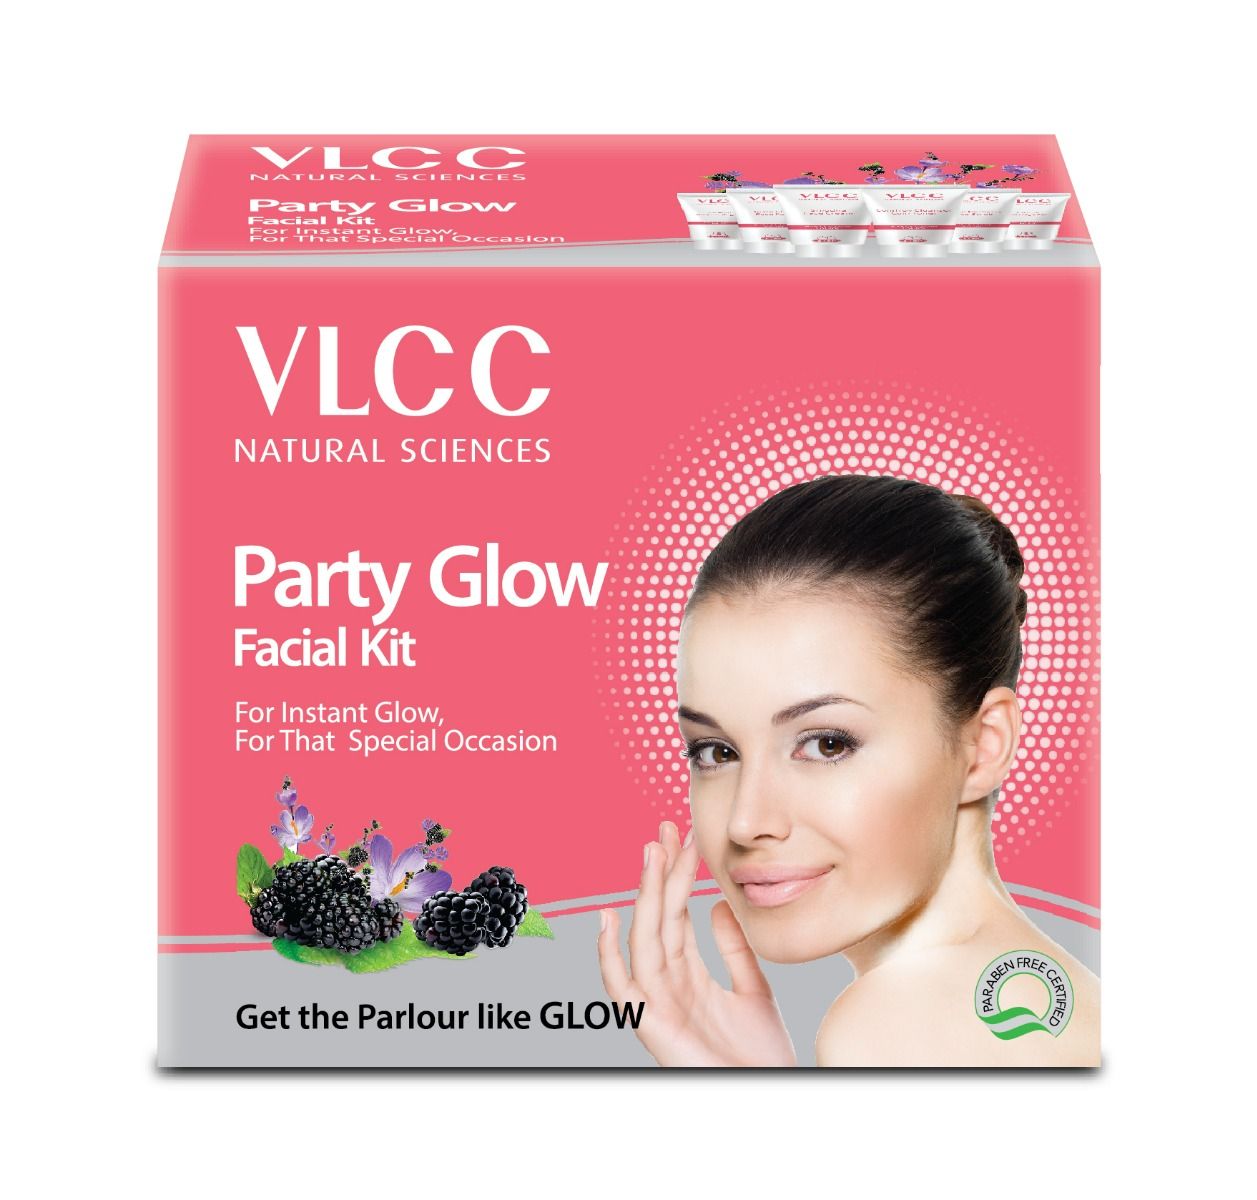 VLCC Party Glow Facial Kit, 1 Count, Pack of 1 